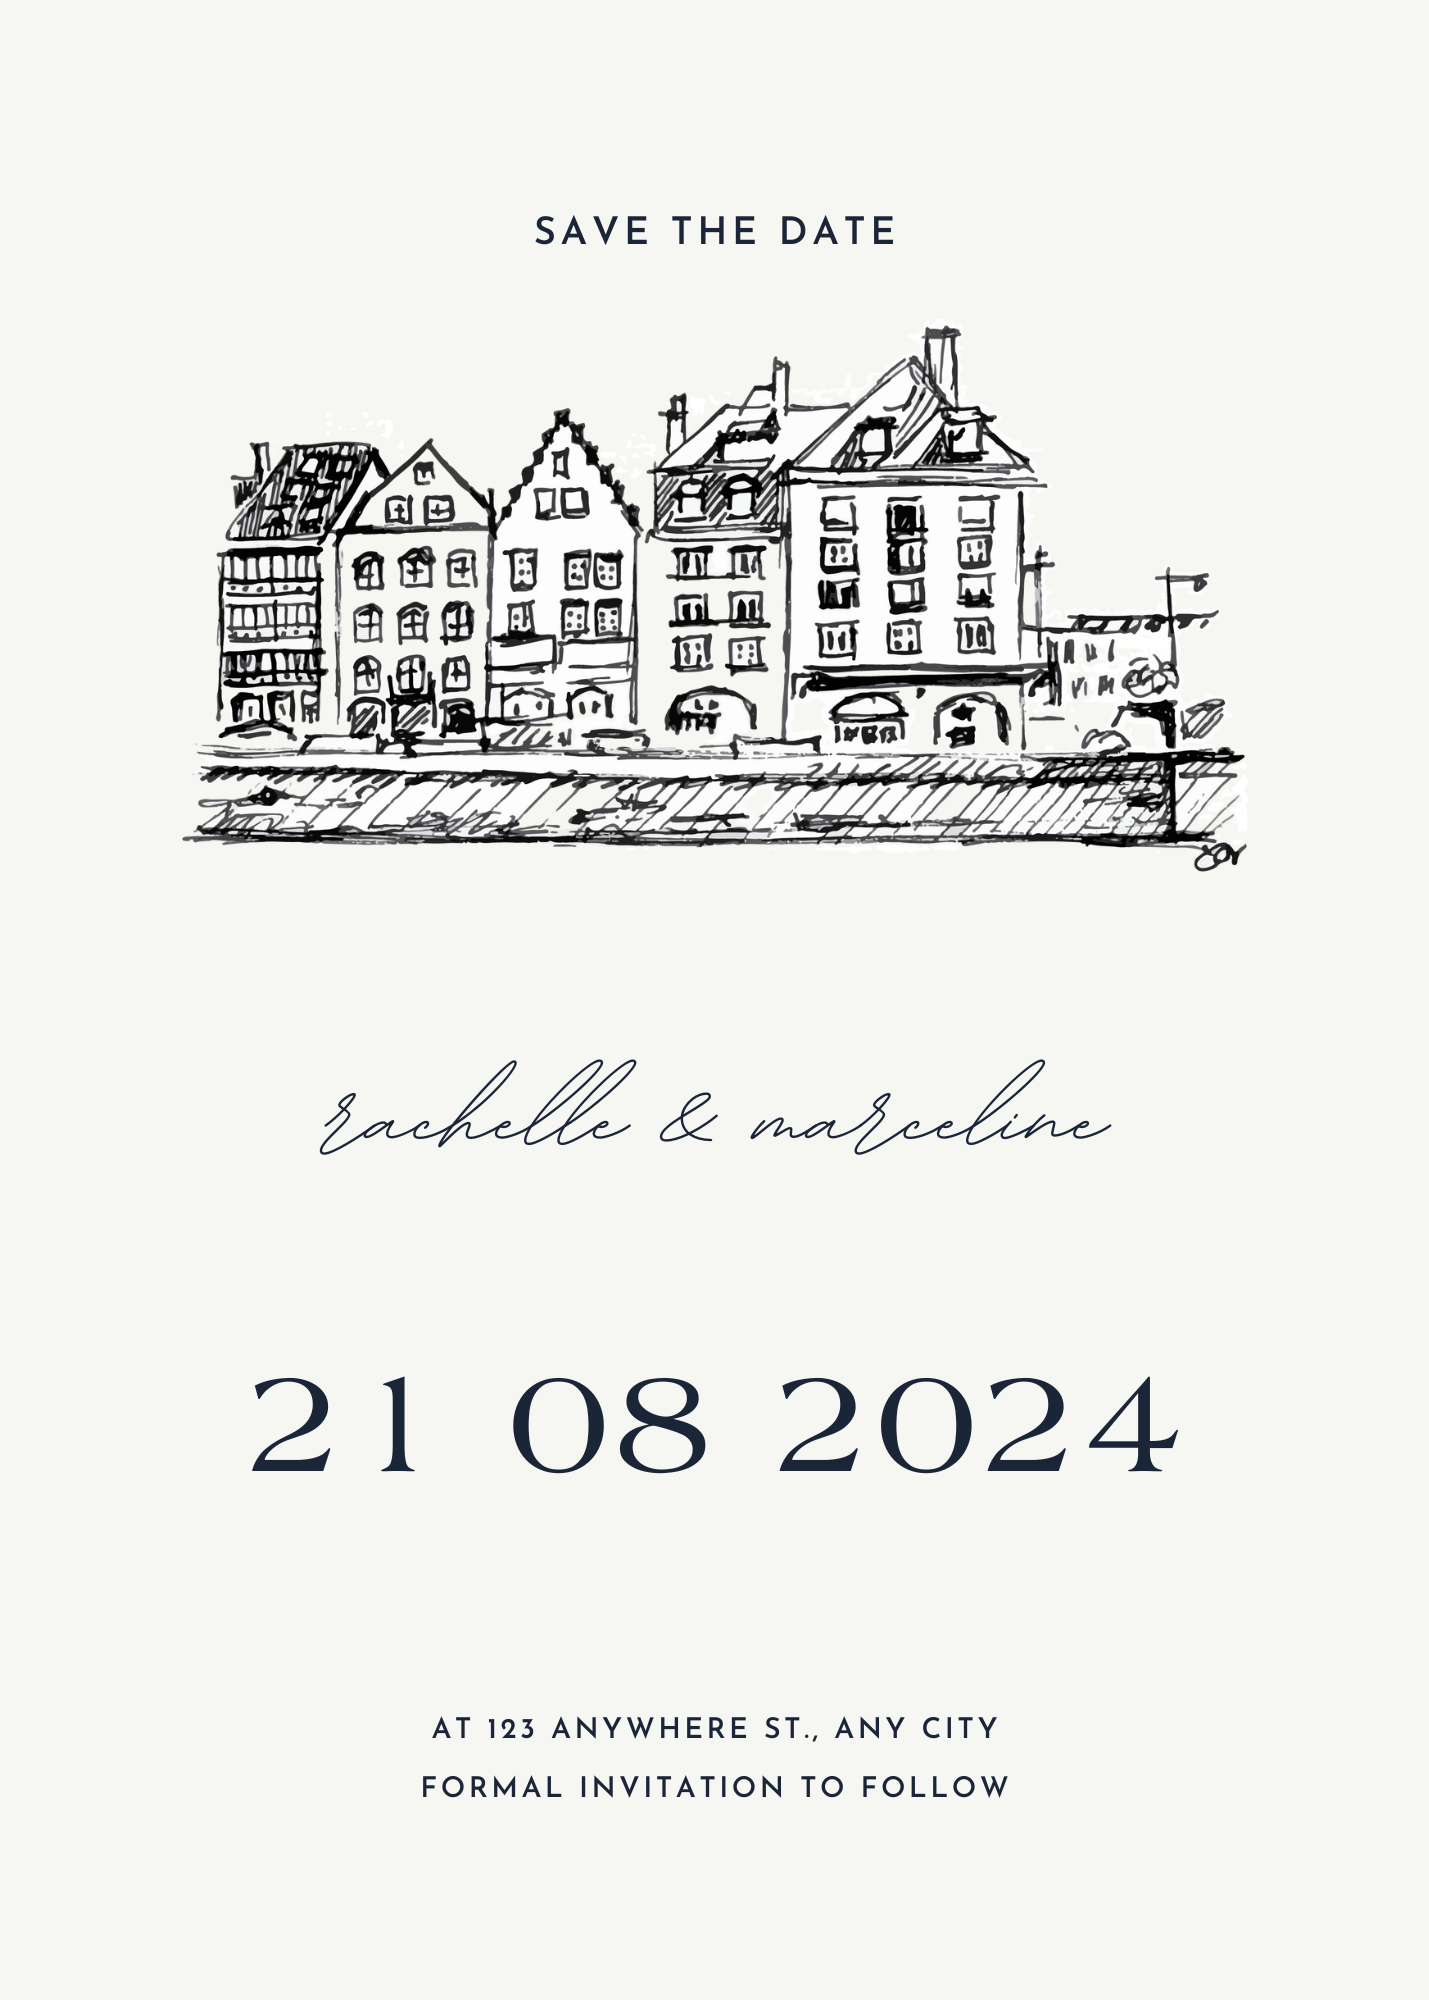 Wedding Venue custom illustration for stationery: invitations, save the date, table signs, location maps